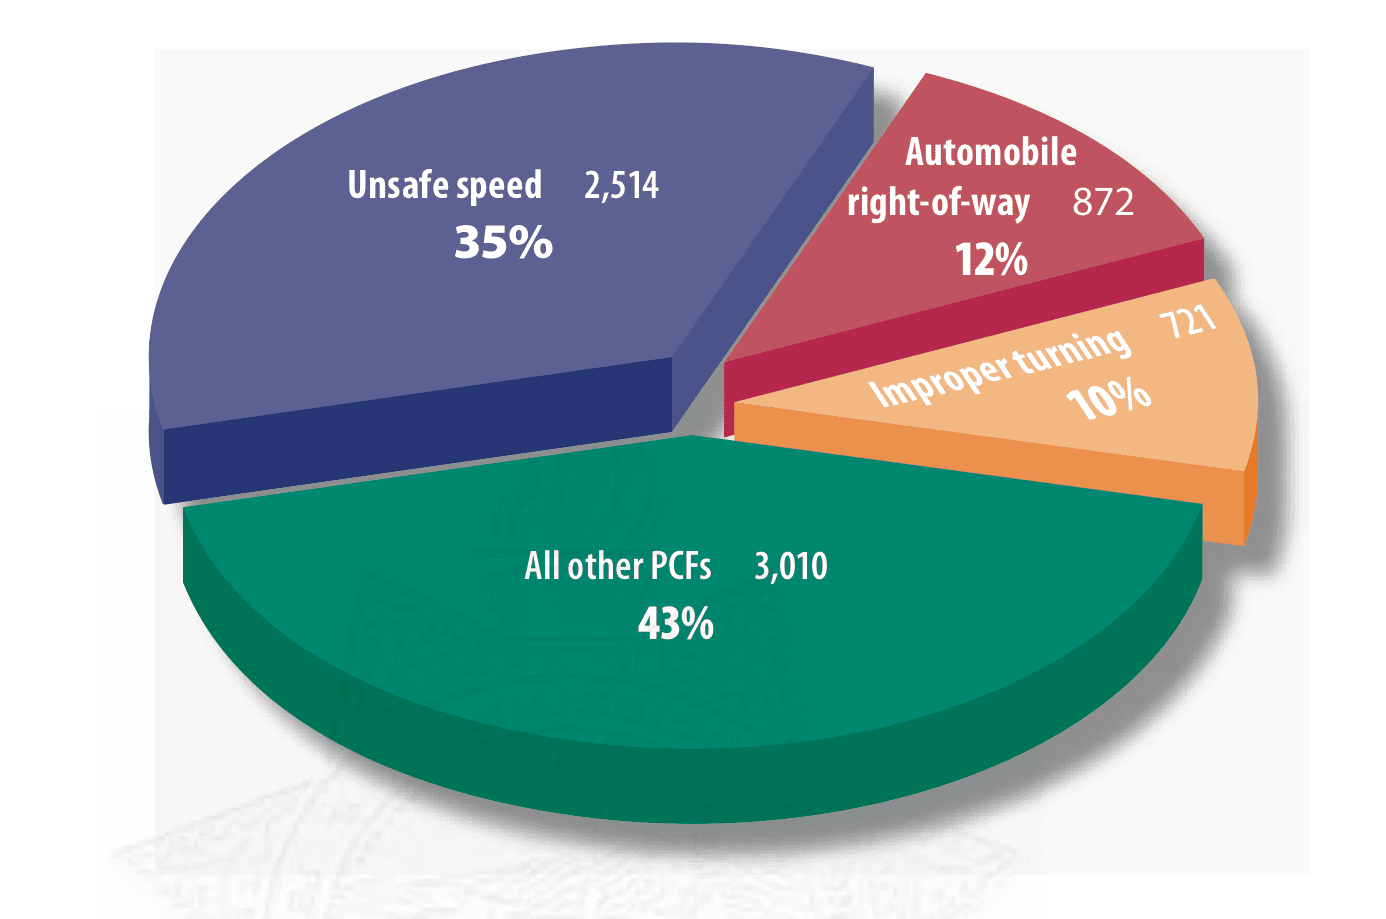 pie chart of causes of law enforcement vehicle collisions resulting in injury